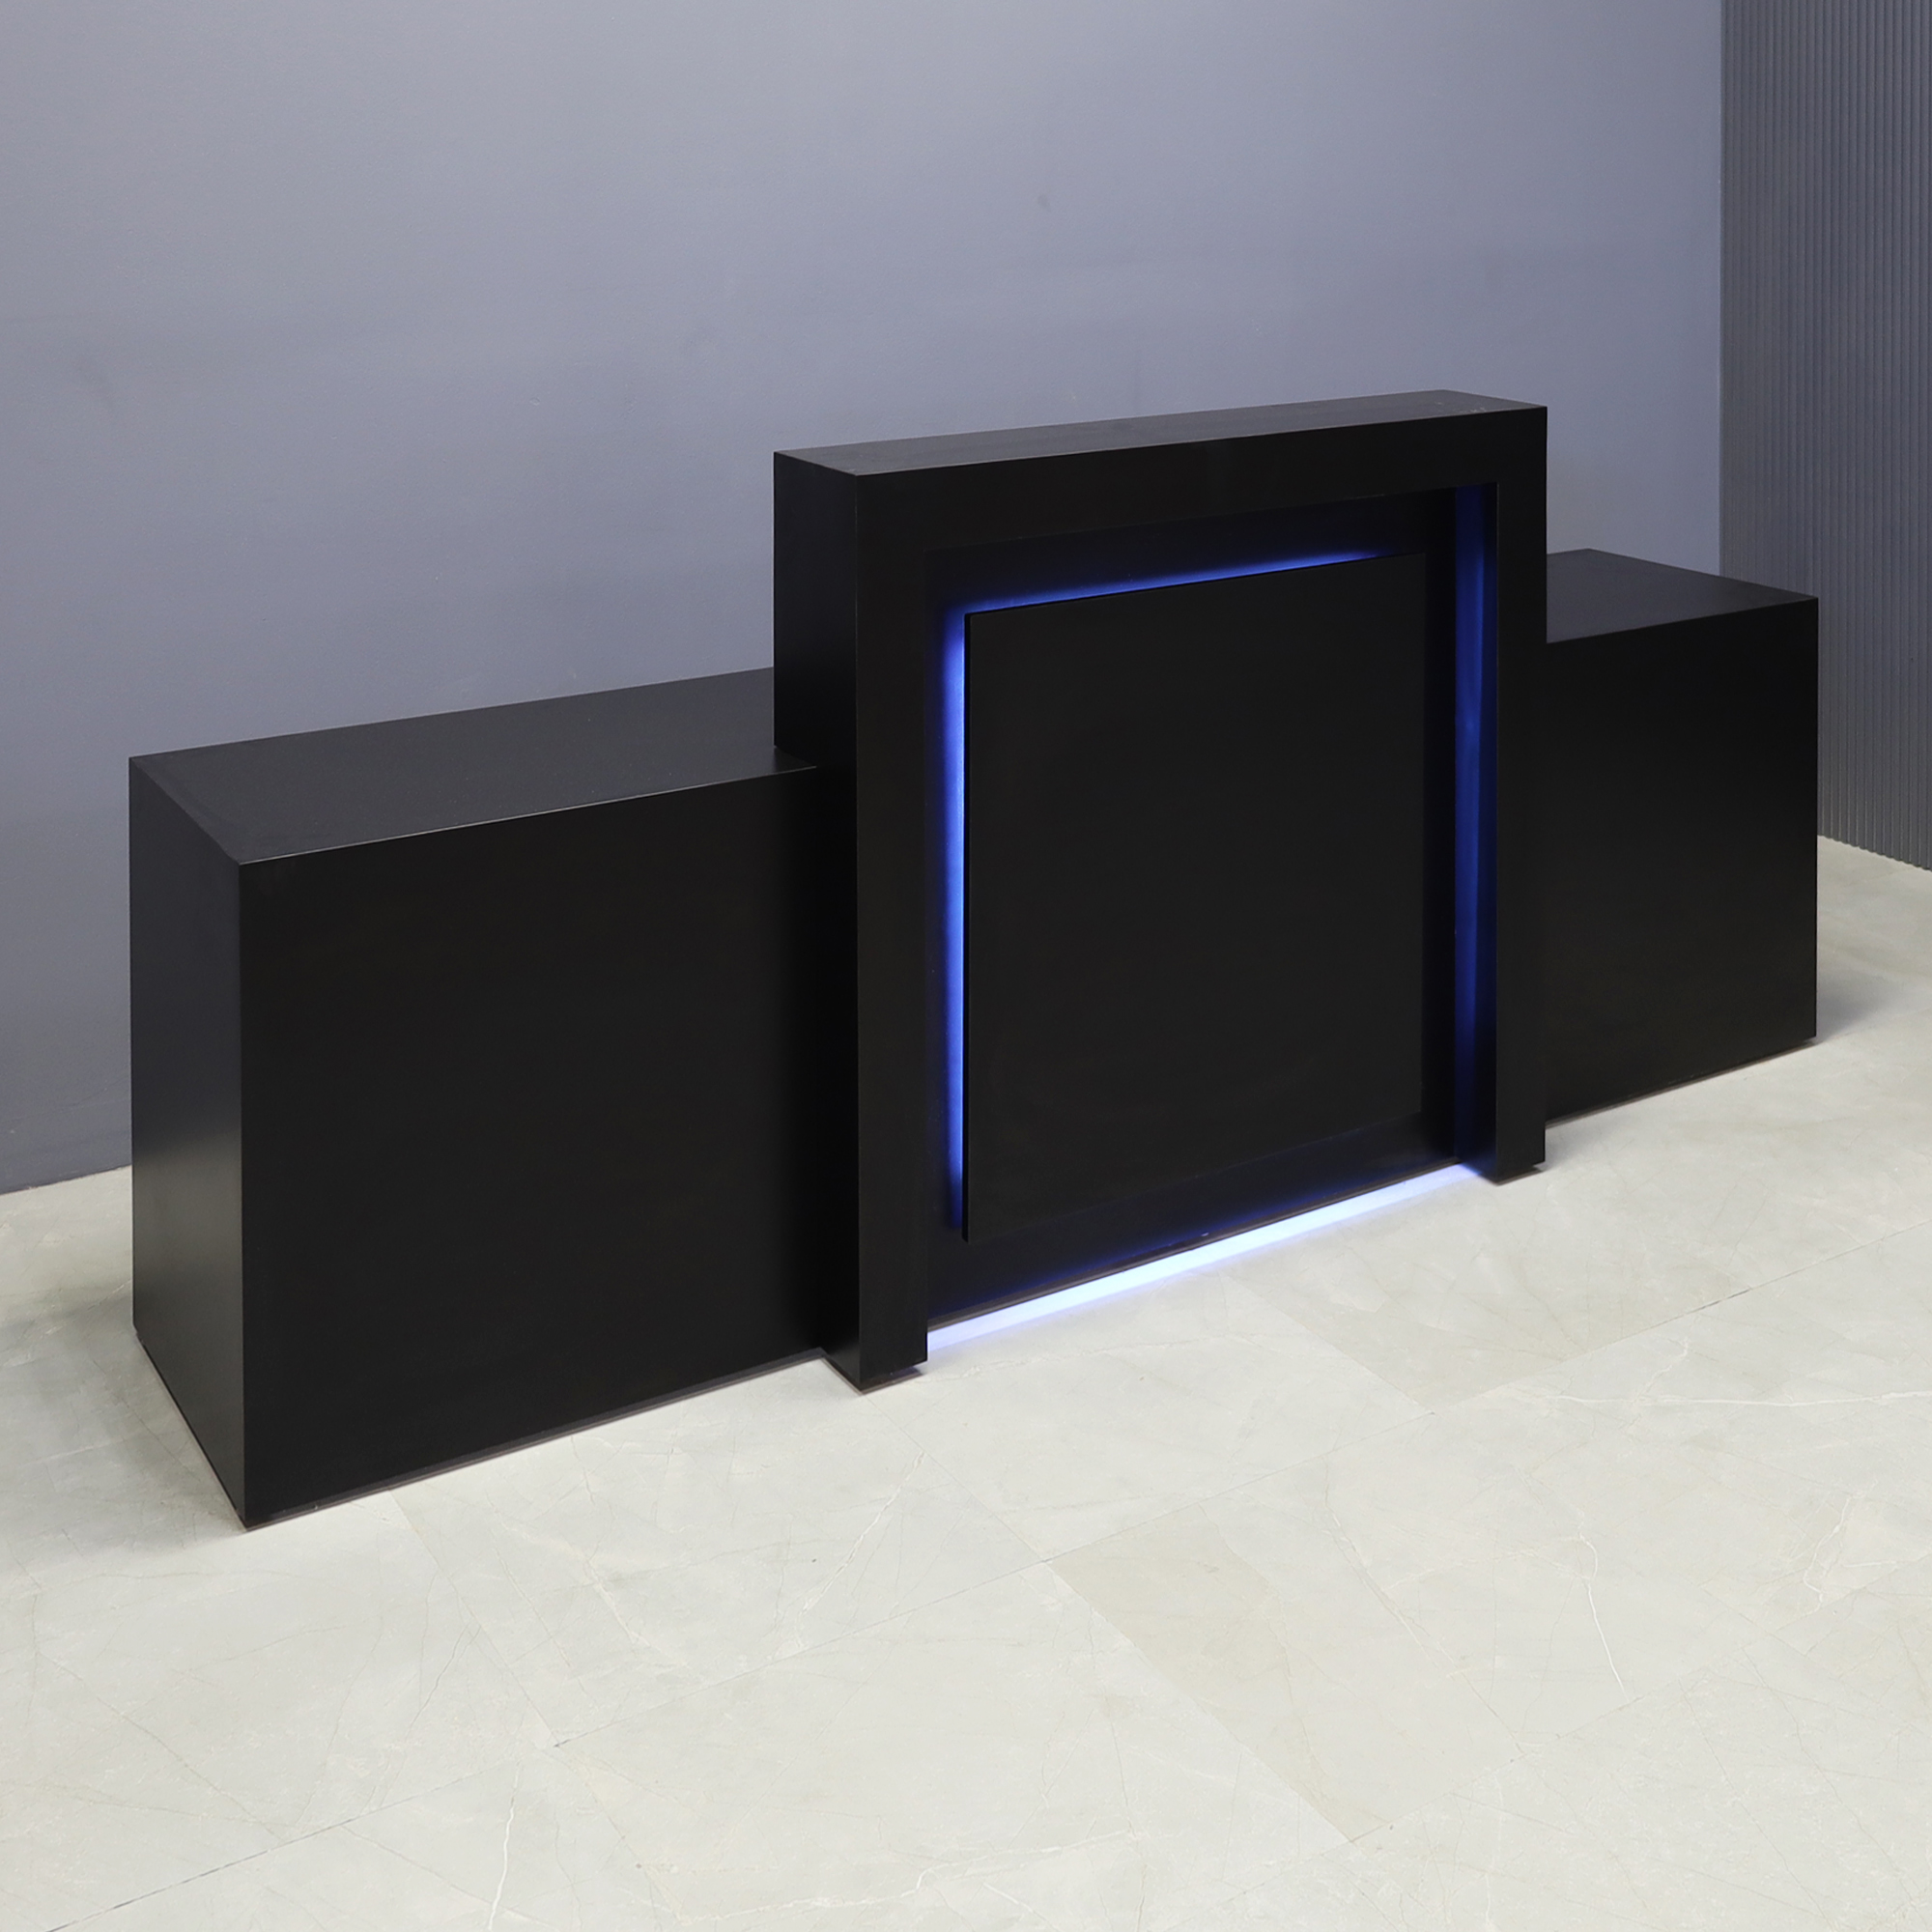 108-inch New York Extra Wide in black matte laminate main desk and recess accent, with multi-colored LED, shown here.